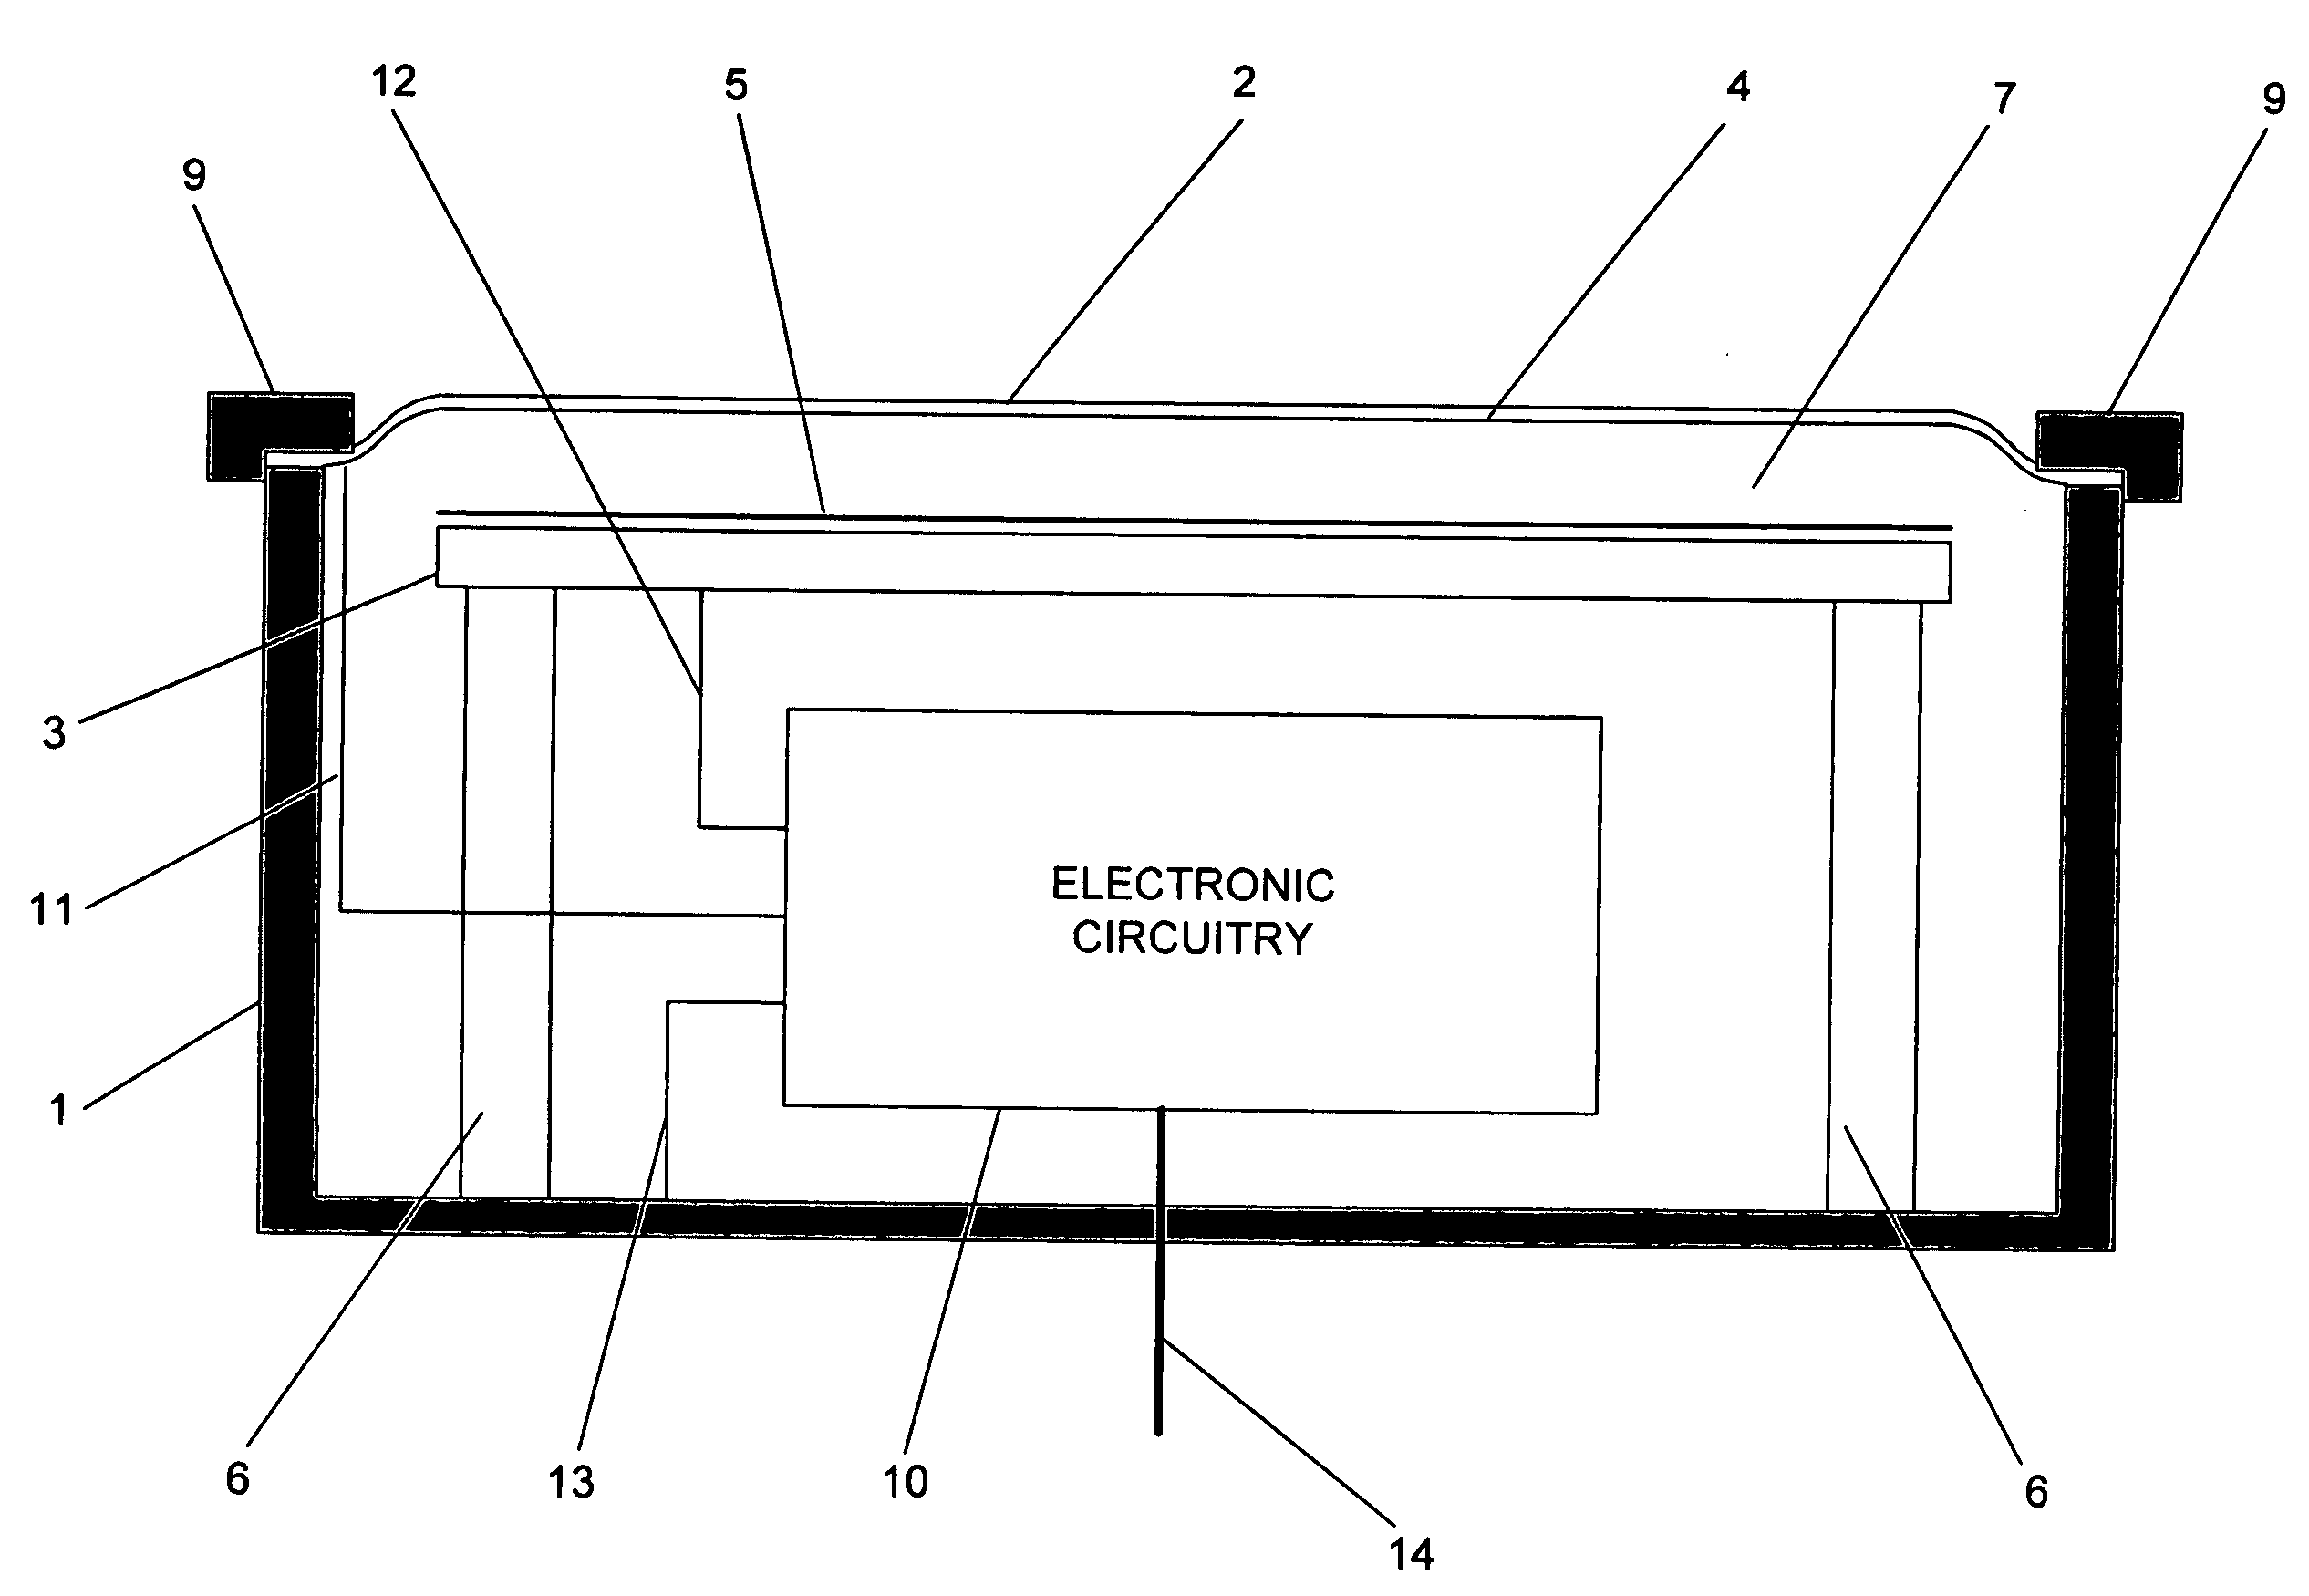 Transducer for sensing actual or simulated body sounds